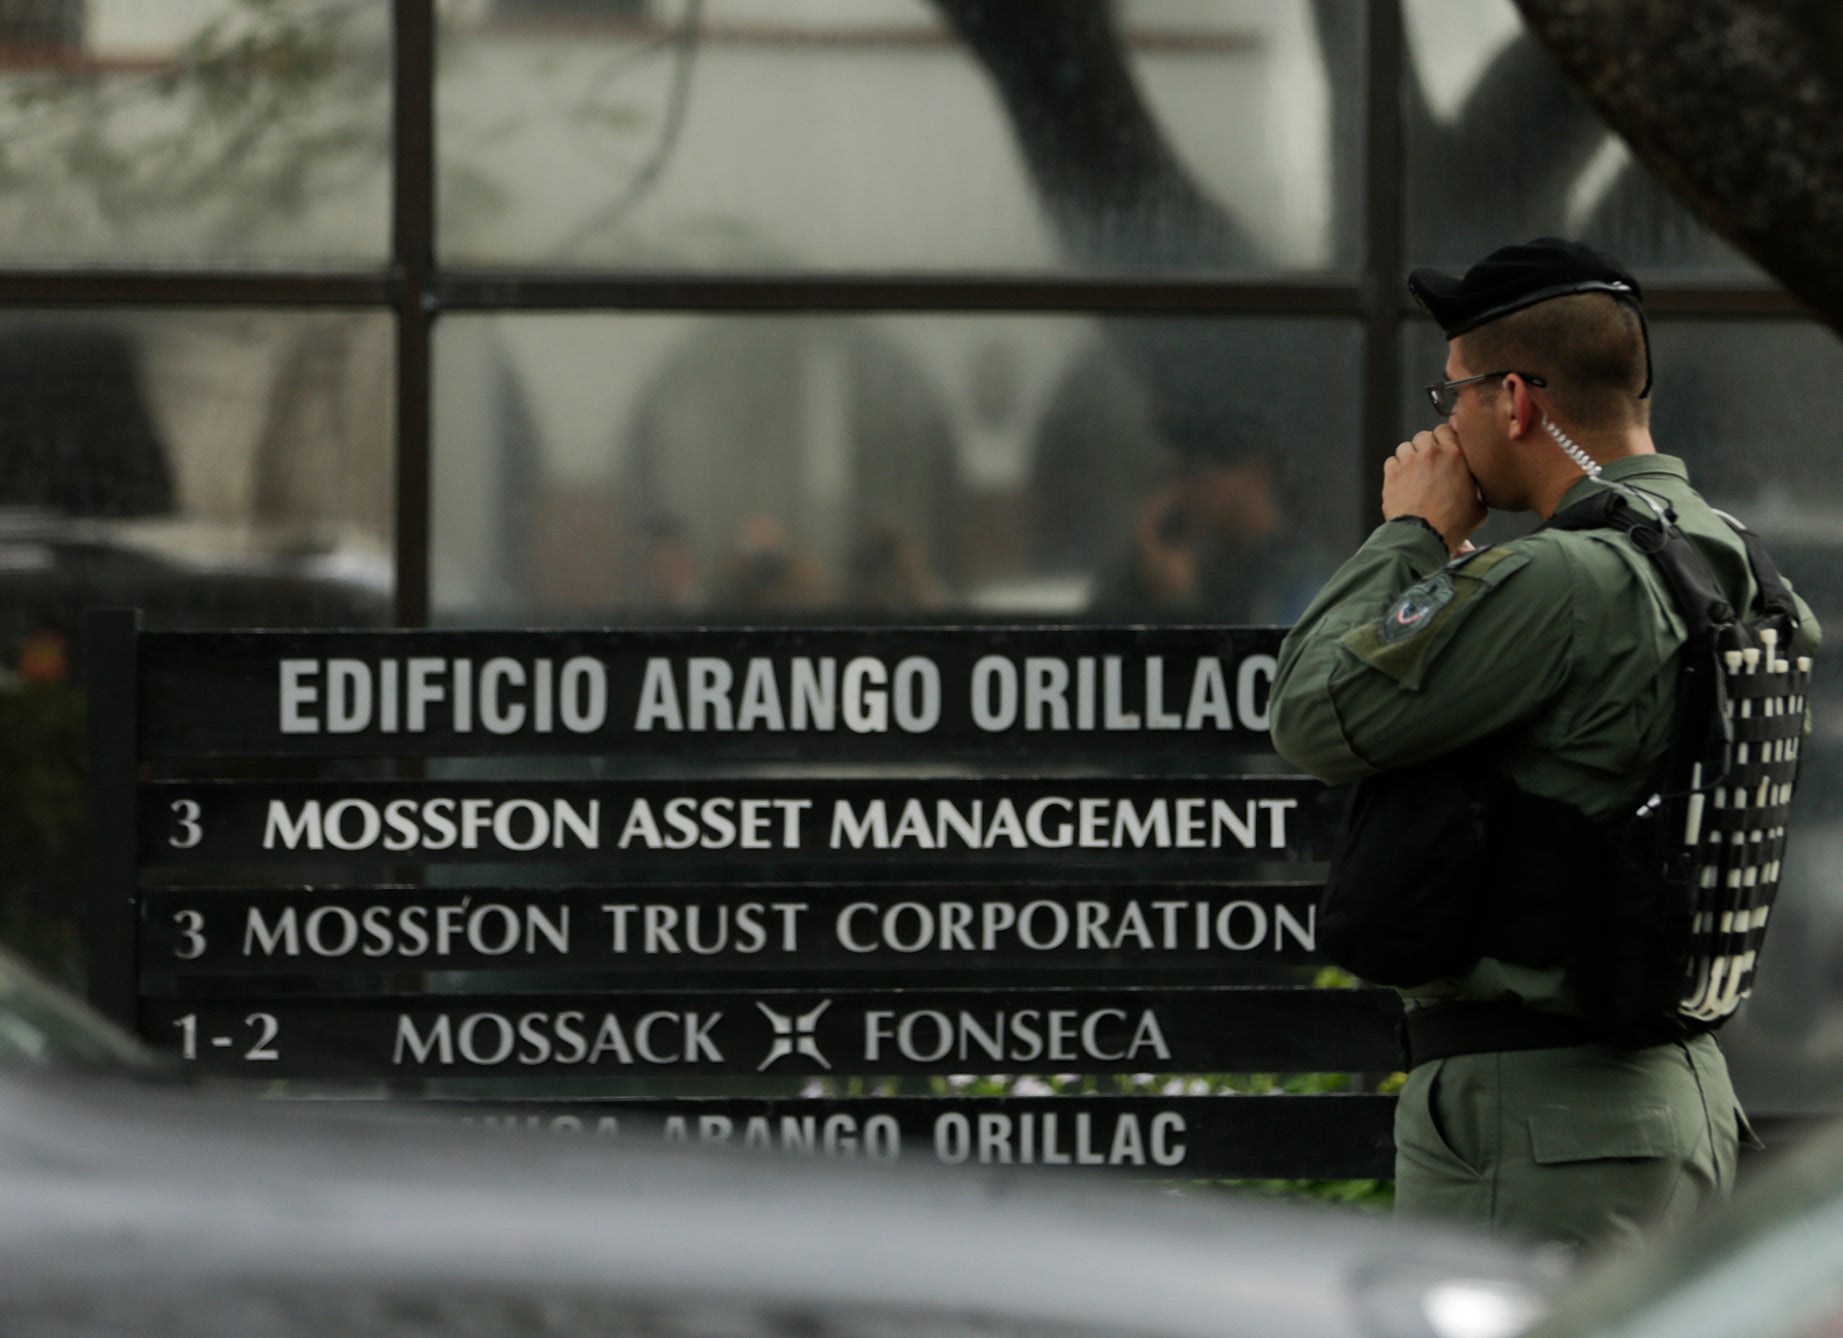 Panama, despite being home to Mossack Fonseca law firm, will not attend